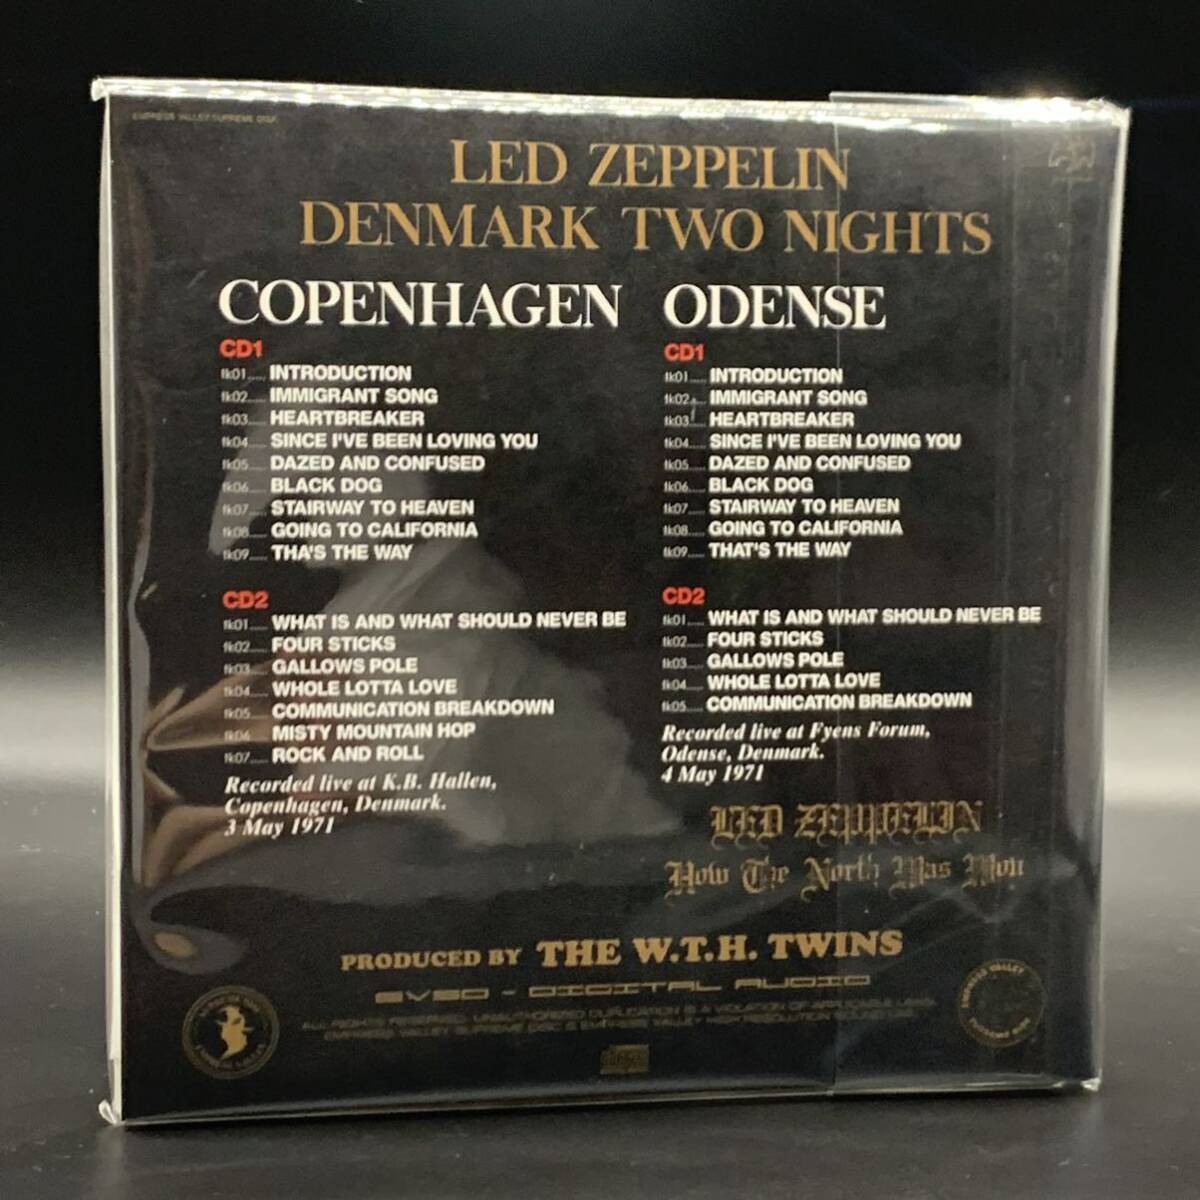 LED ZEPPELIN / HOW THE NORTH WAS WON「北部開拓史」(8CD BOX)の画像8